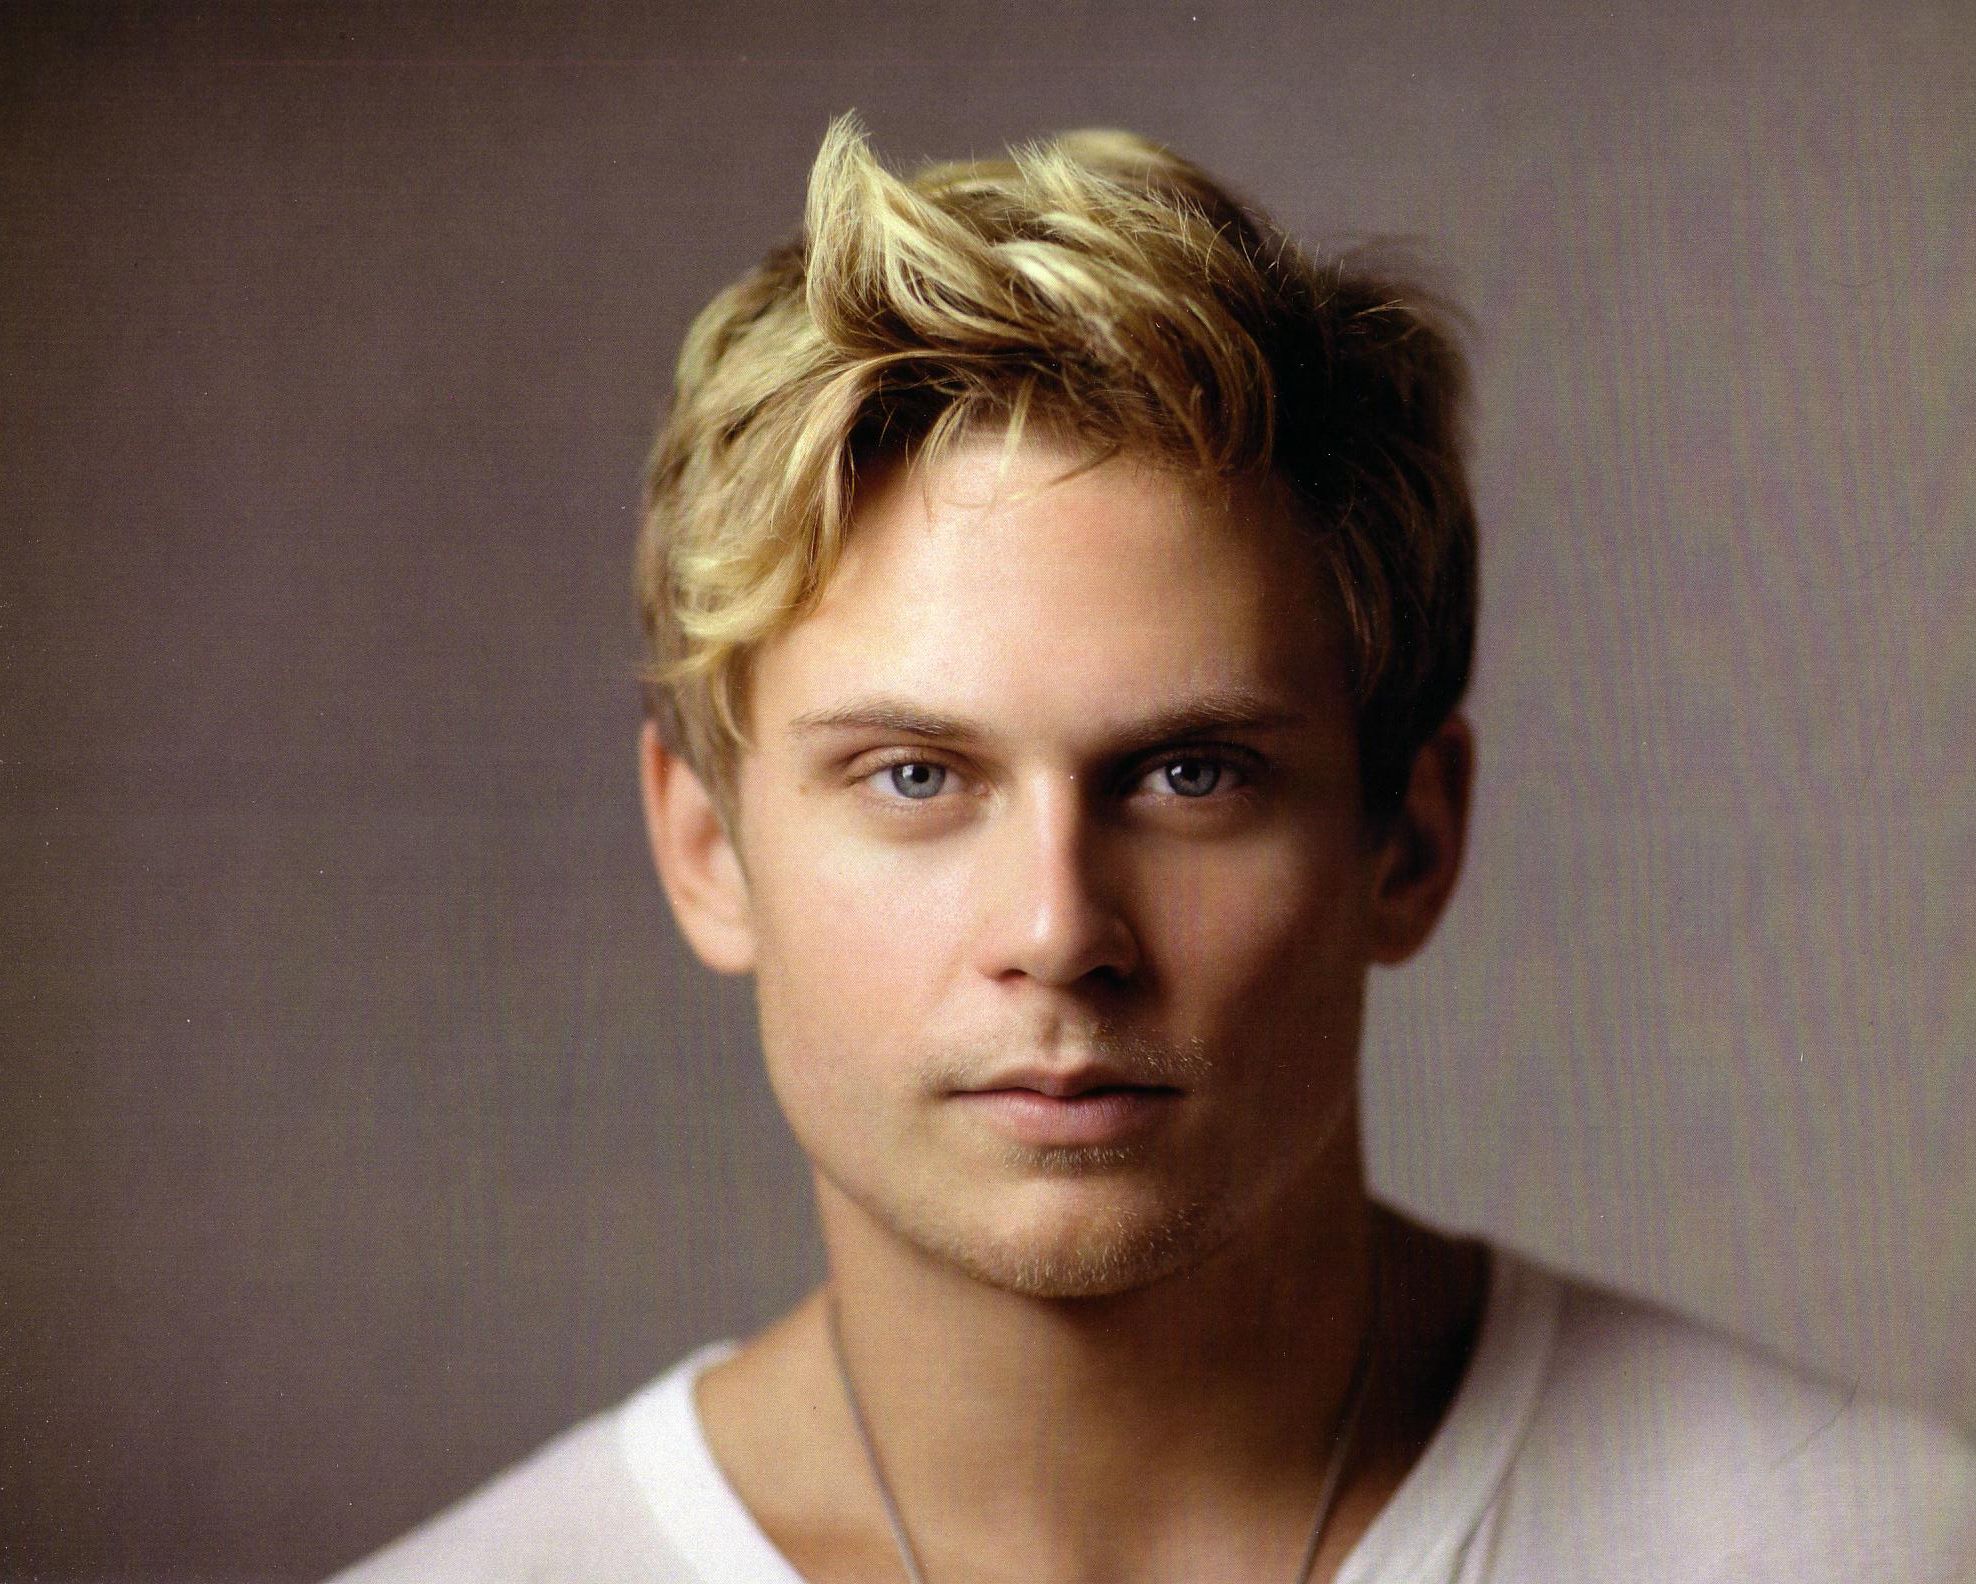 Billy Magnussen Goes 'Into The Woods' and Comes Out a Star HuffPost